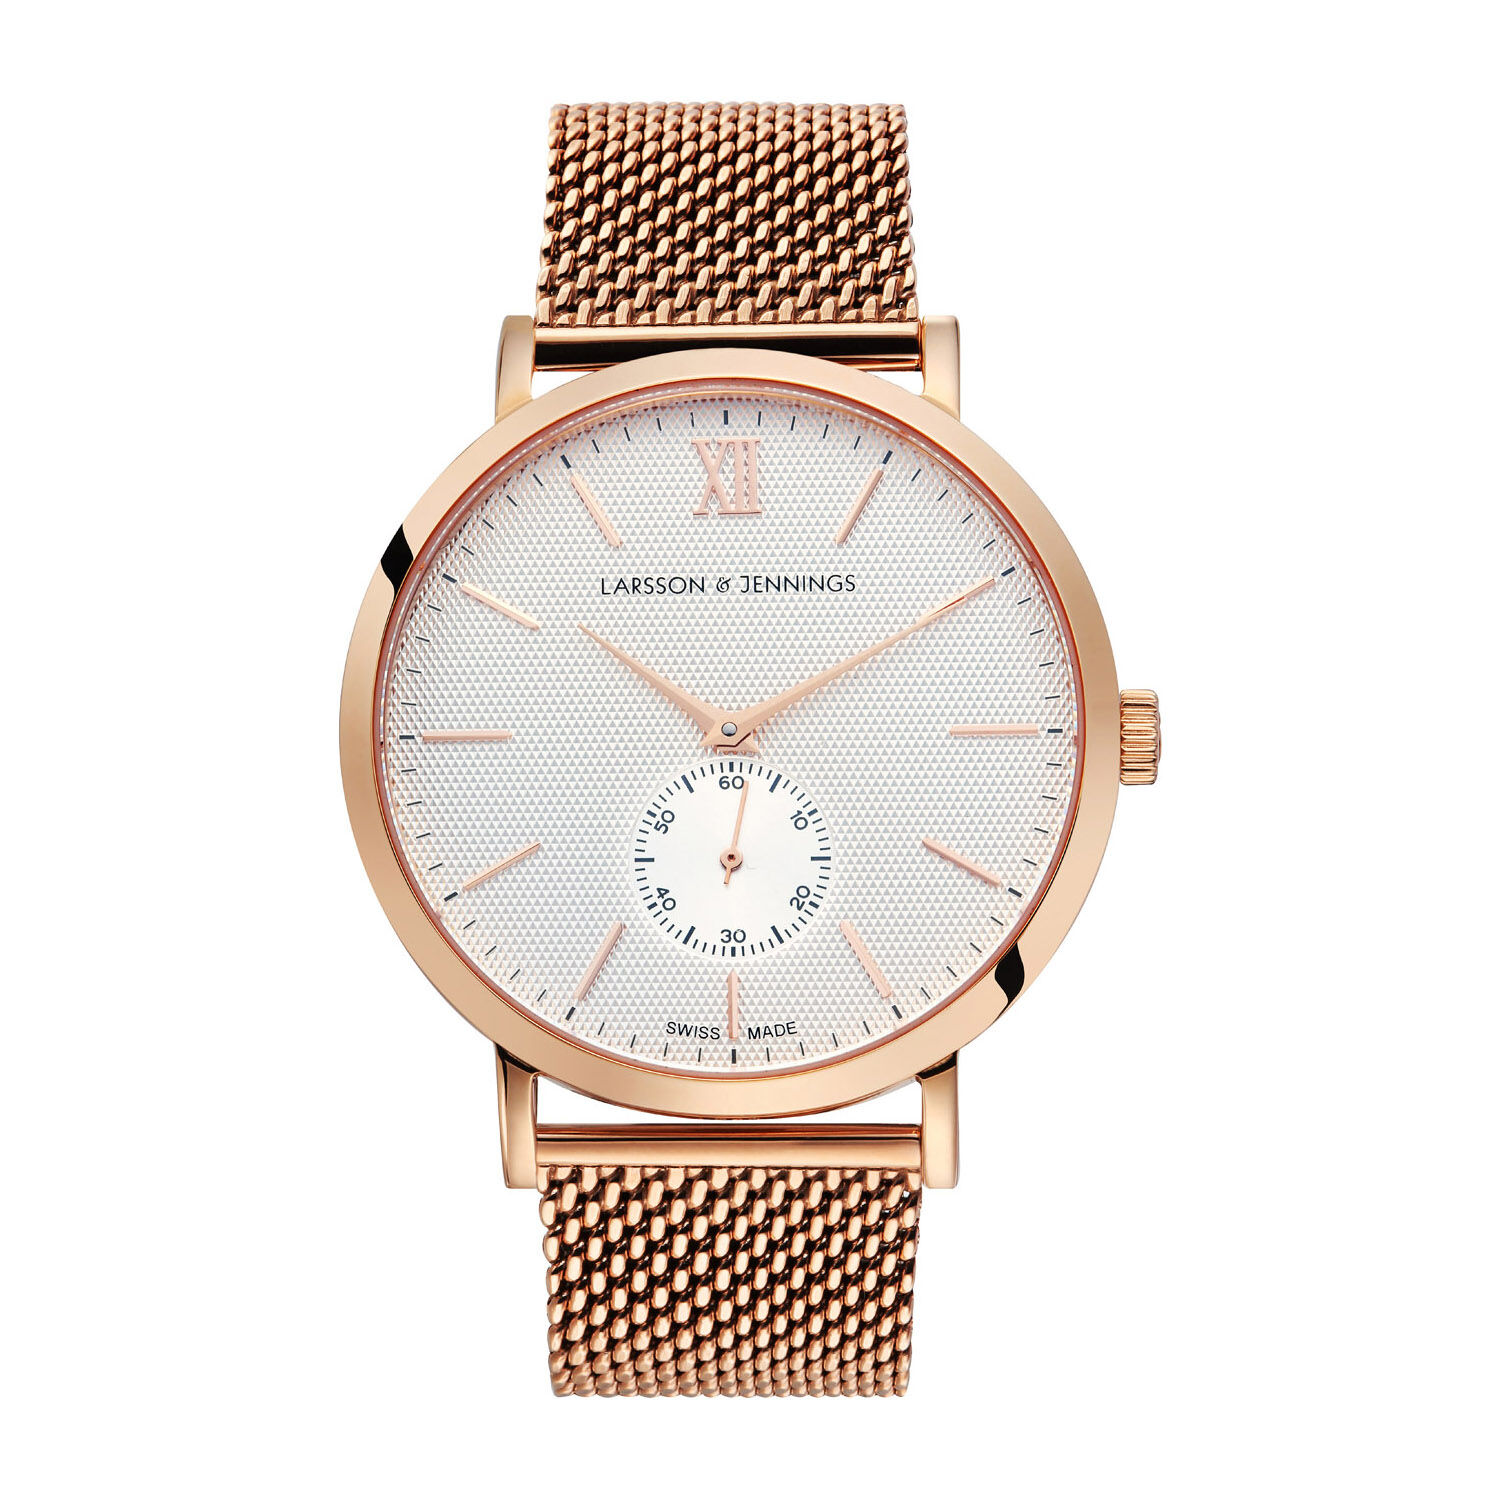 Larsson & Jennings Limited Edition 40mm Rose Gold Watch